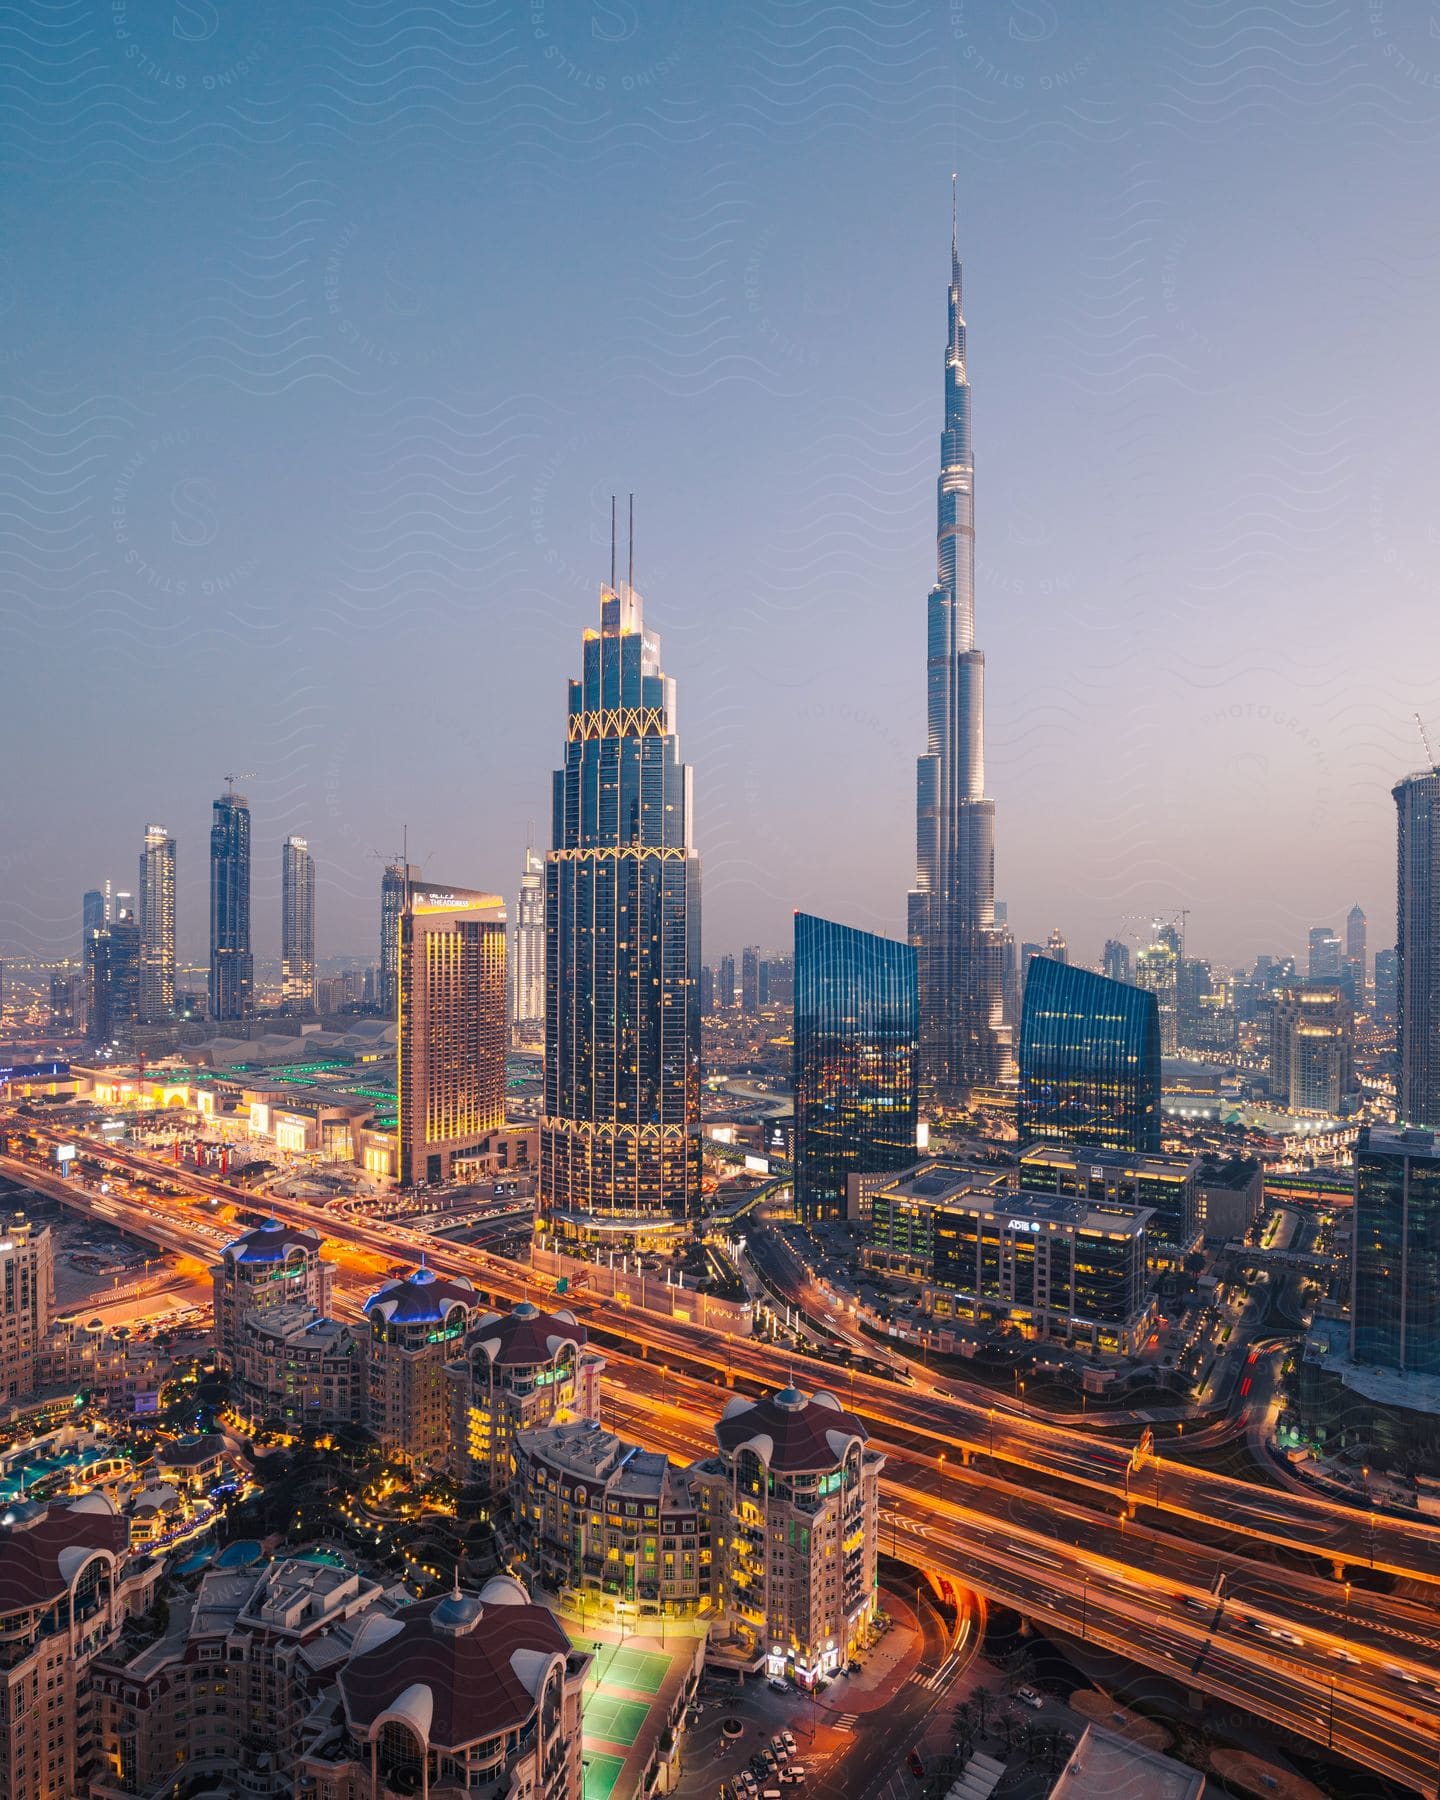 Tall towers and skyscrapers overlook the metropolitan city of Dubai